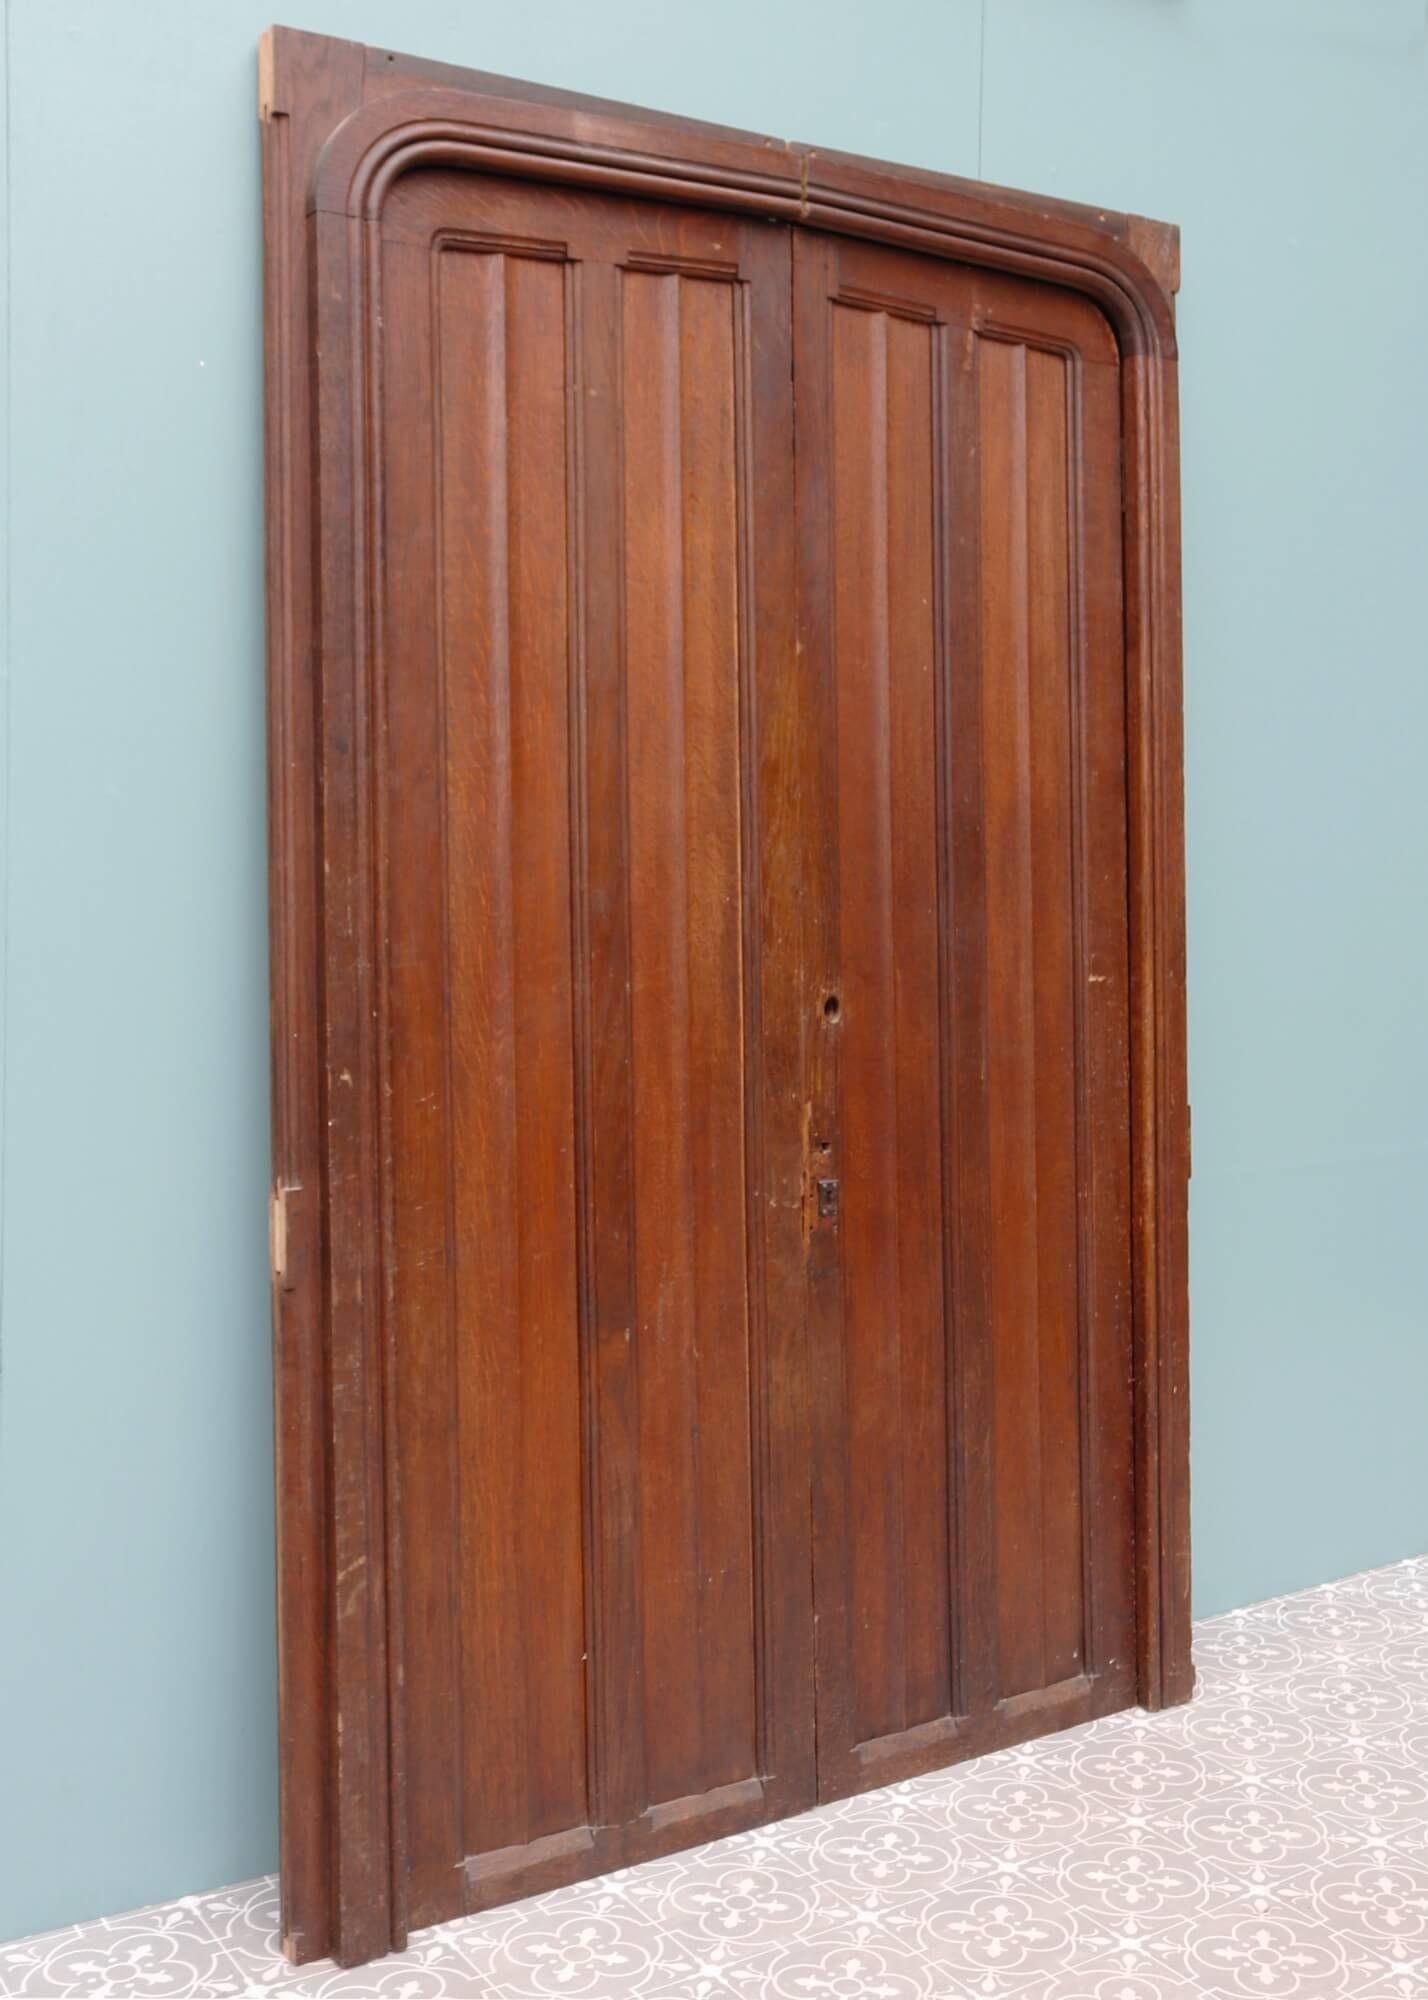 These Edwardian oak doors with frame are originally from Rochester Cathedral, the second oldest Cathedral in England. We are also selling a single internal door salvaged from the same location. These double doors create a shallow arch, each detailed